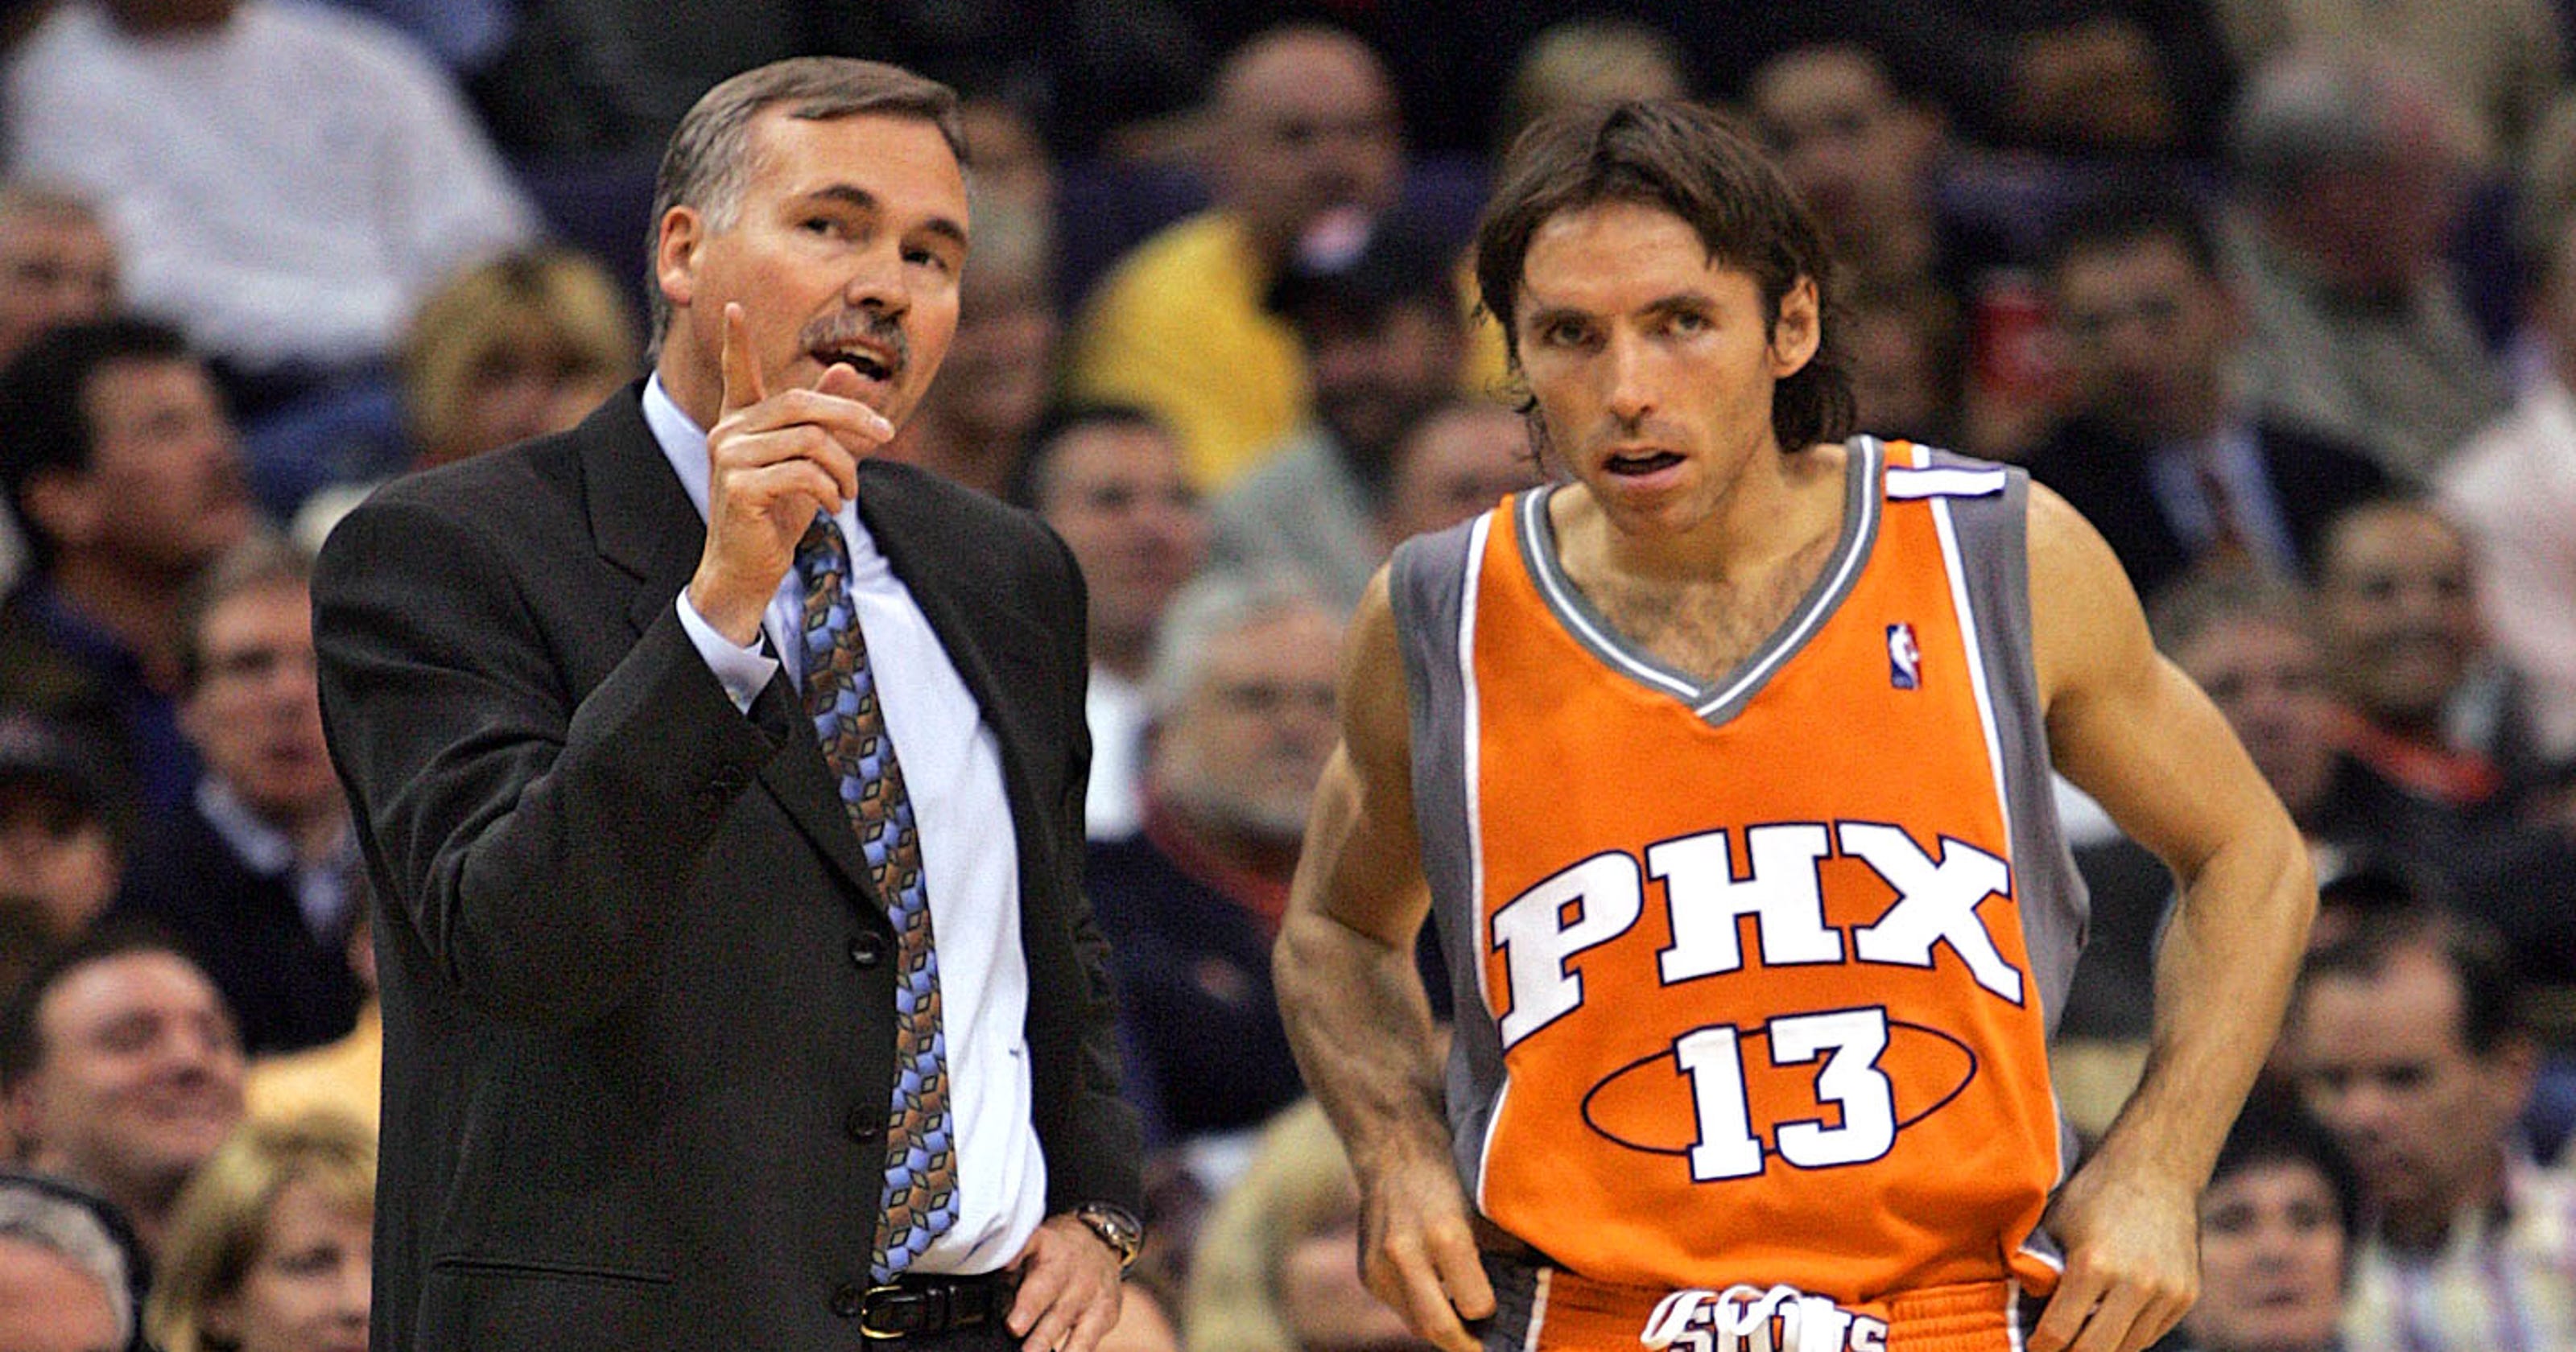 Mike D'Antoni says he and Steve Nash pushed the envelope